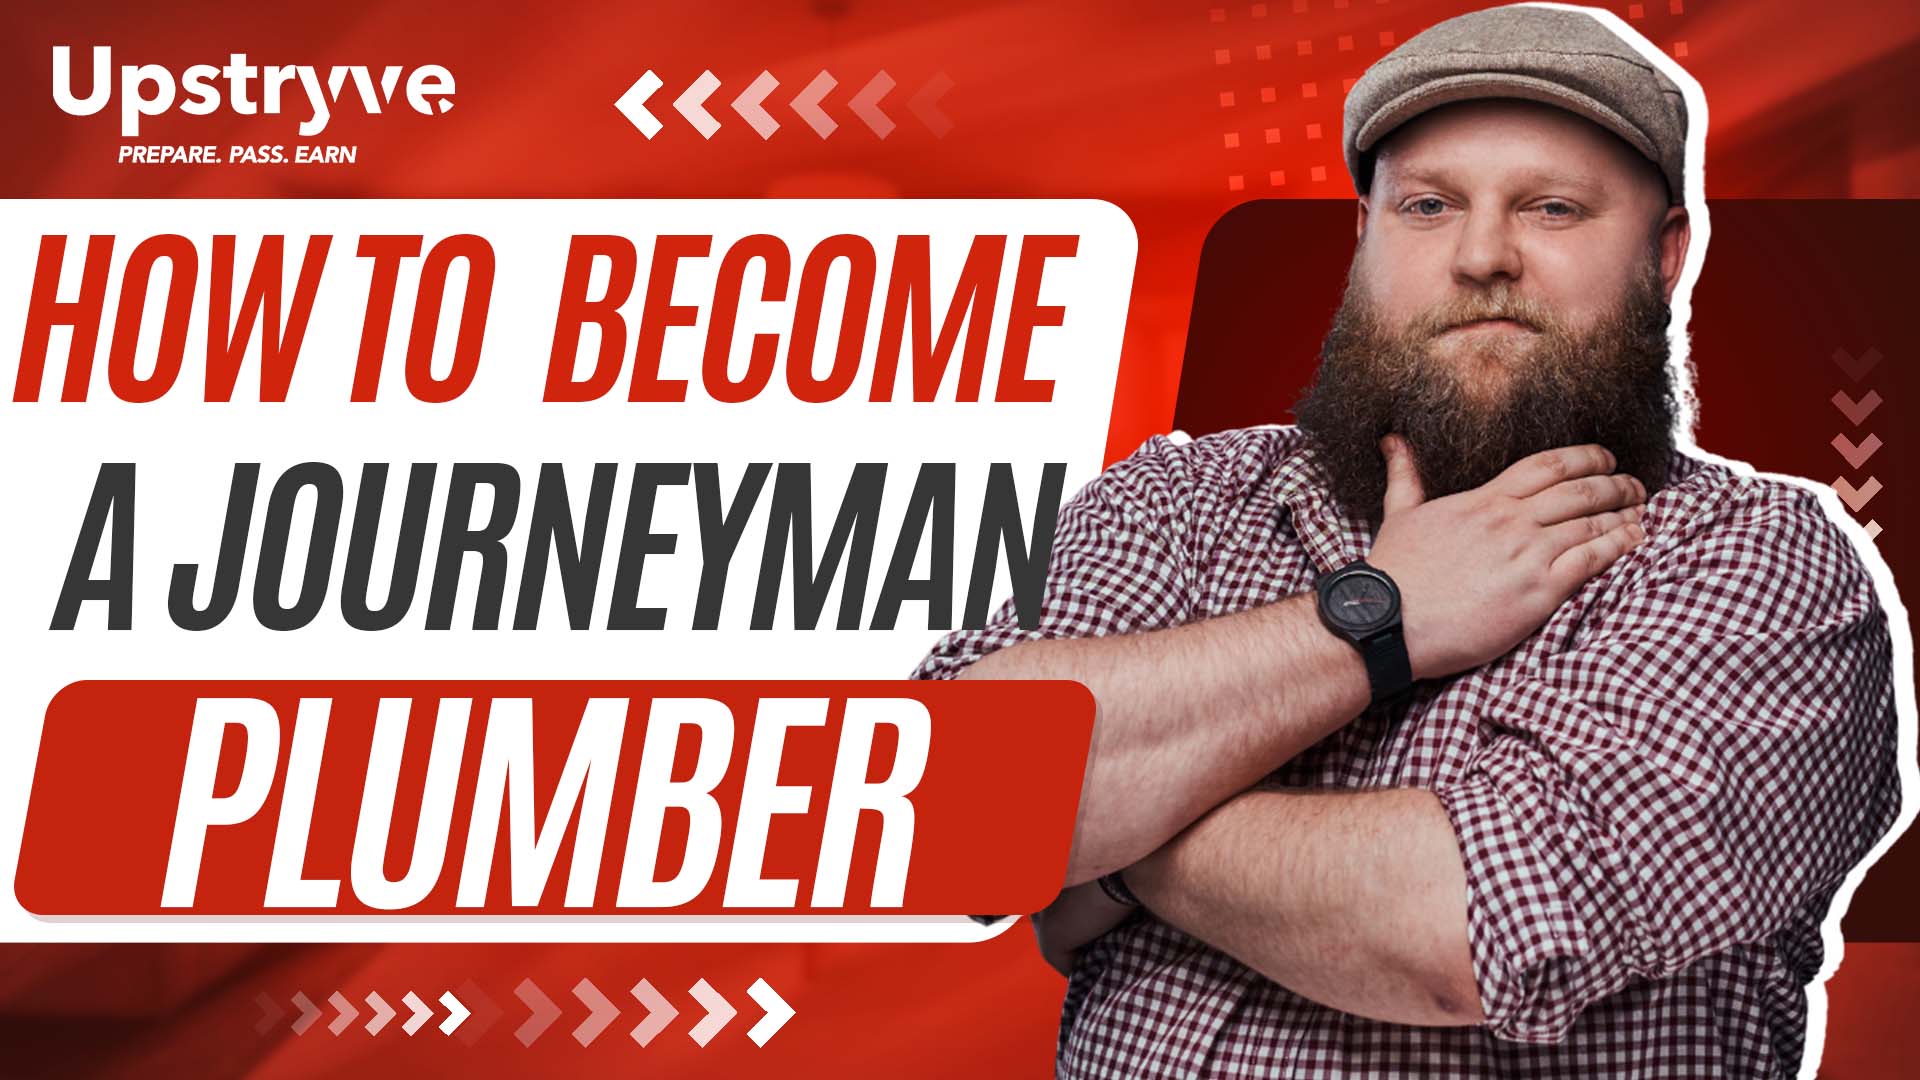 How to become a Journeyman plumber? This is a question our tutors and mentors get asked all the time. In today's video Mentor and Master Plumber Thomas Hicken disscusses the steps and requirements needed to become a Journeyman Plumber. These steps although simple, are often ovelooked by many apprentice plumbers. 

Make sure to watch the entire video as Thomas also touches on the topic of what to do when you are ready to move past your Journeyman Plumbing licesne and become a Master Plumber or a Plumbing Contractor. He also will explain the differences between the two and why you should consider them.